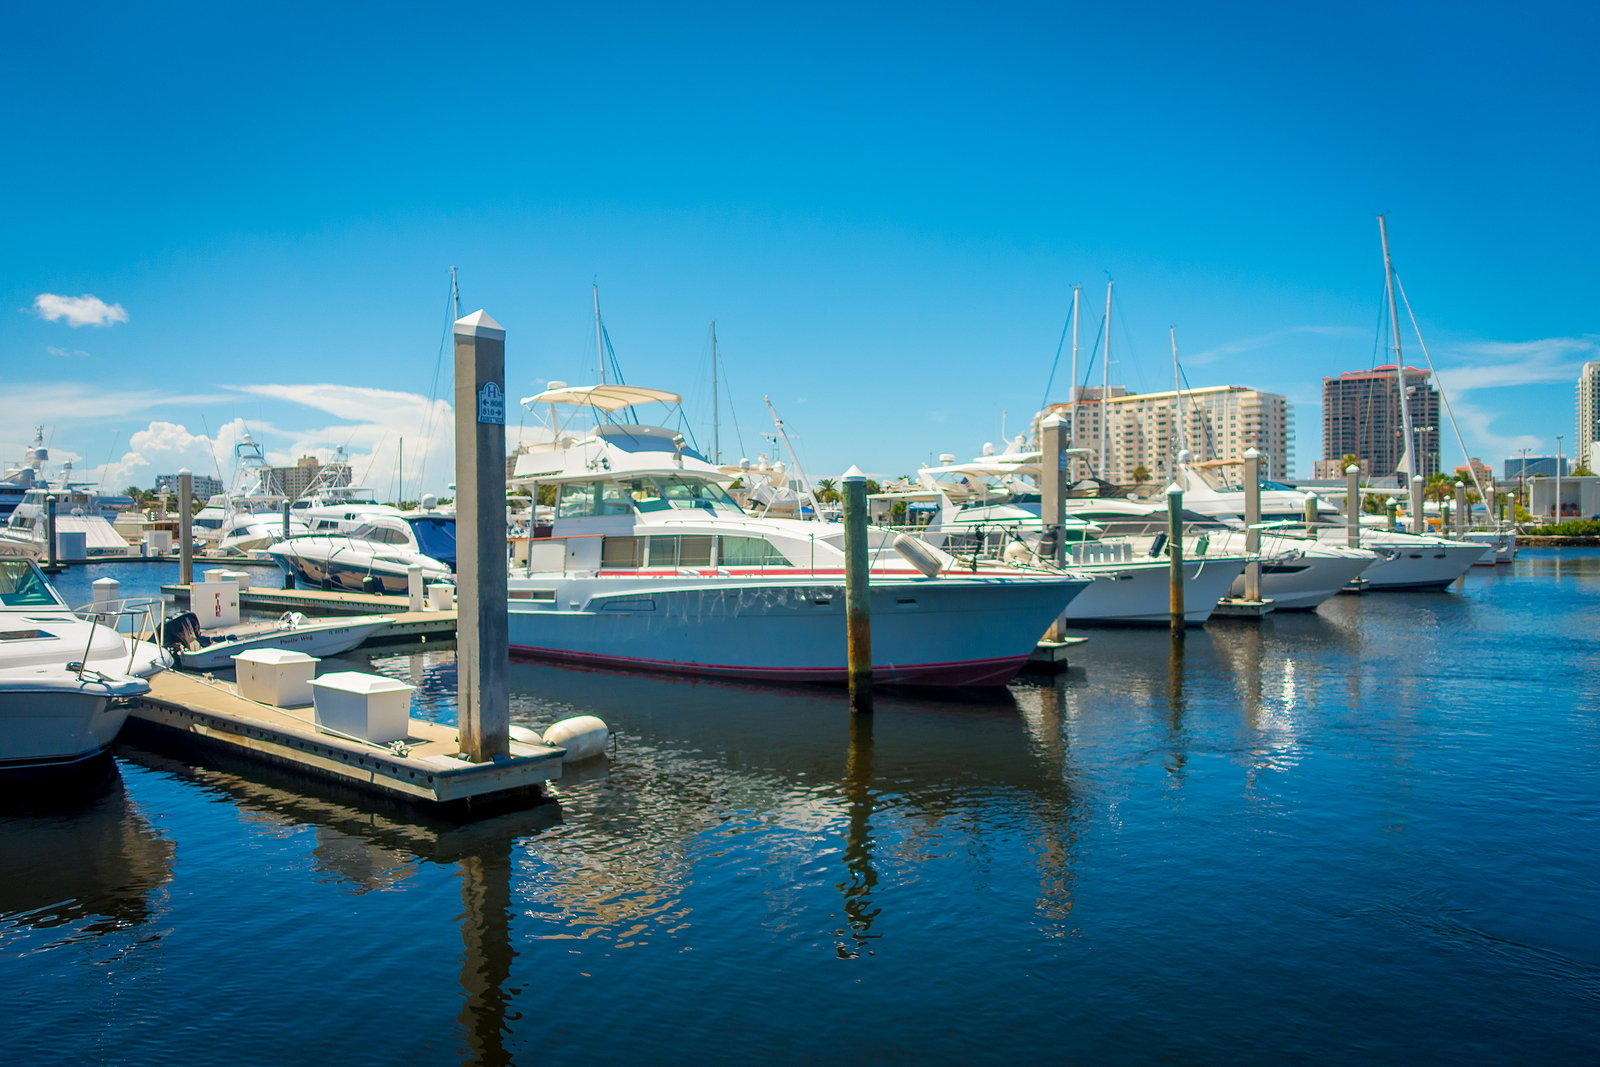 Boat sales booming because owner hired marine marketing agency